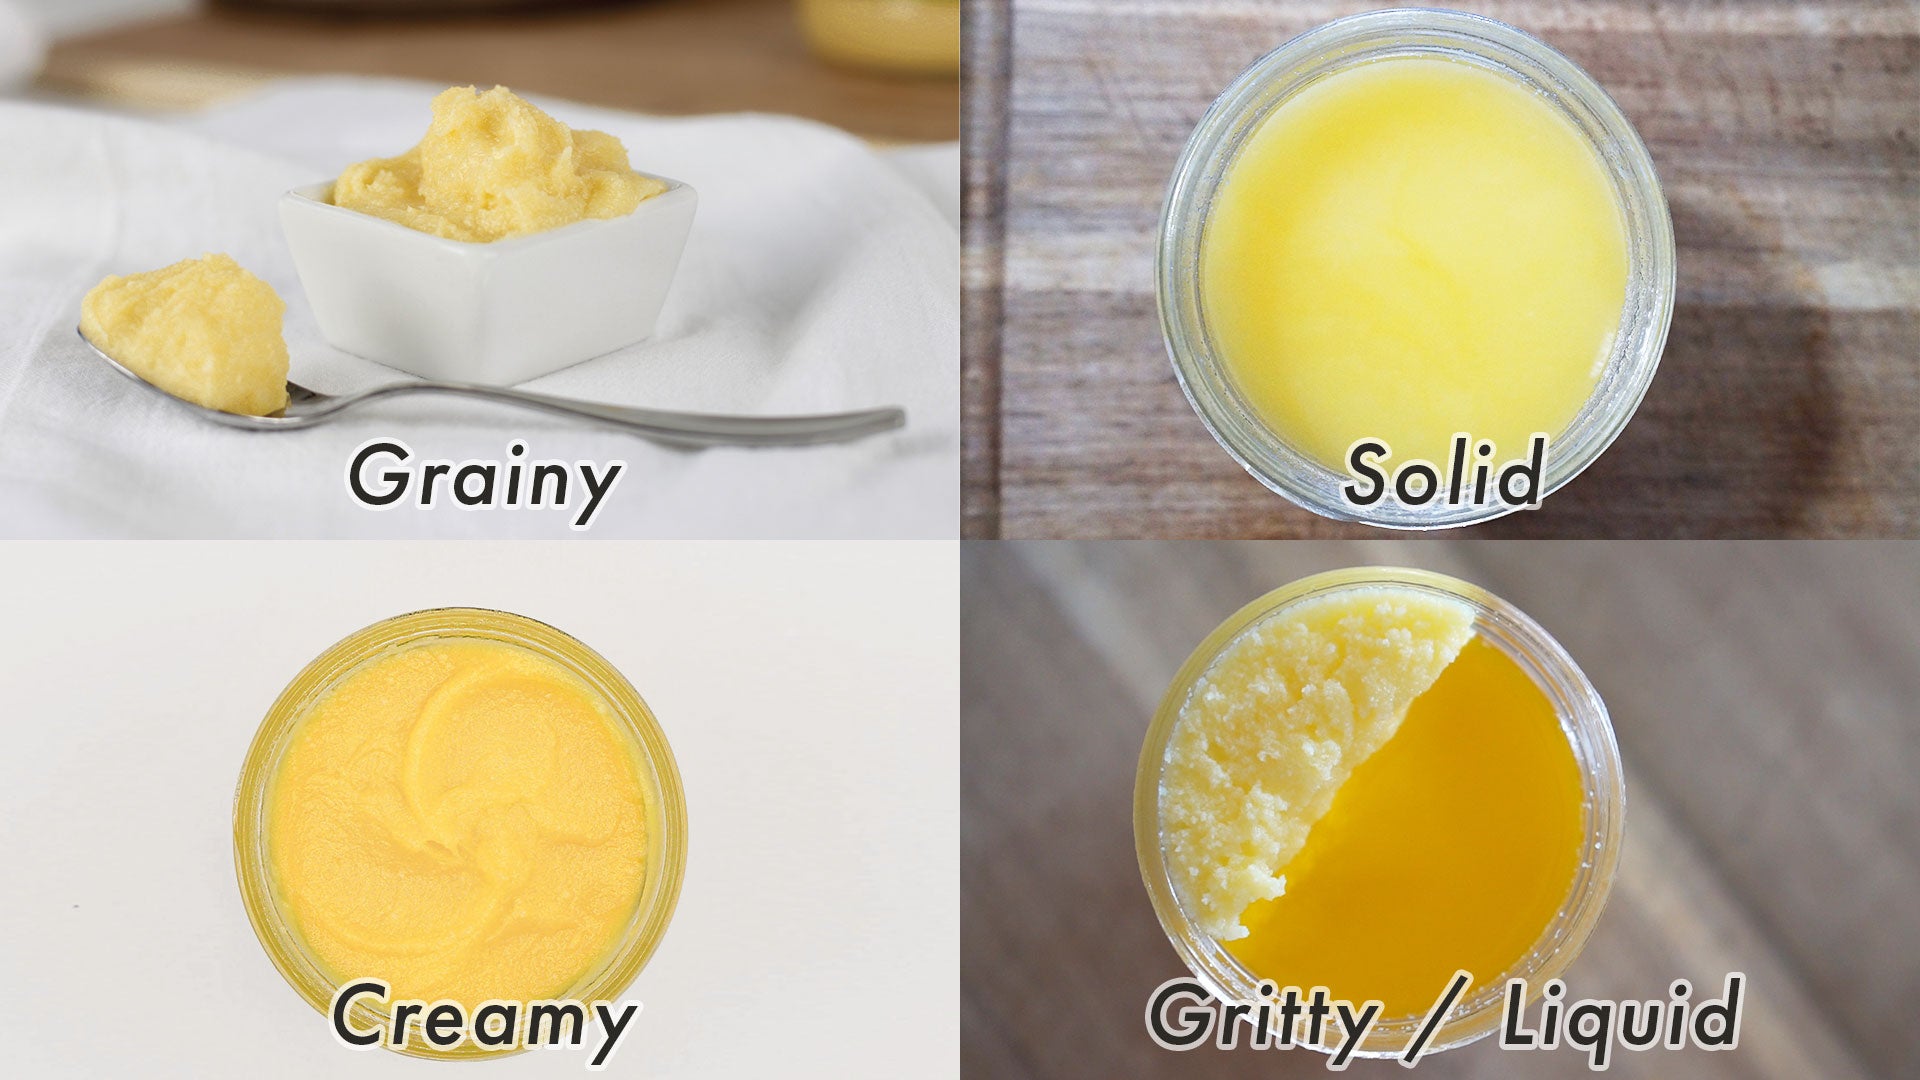 Different ghee textures. Grainy, solid, creamy, and mixed